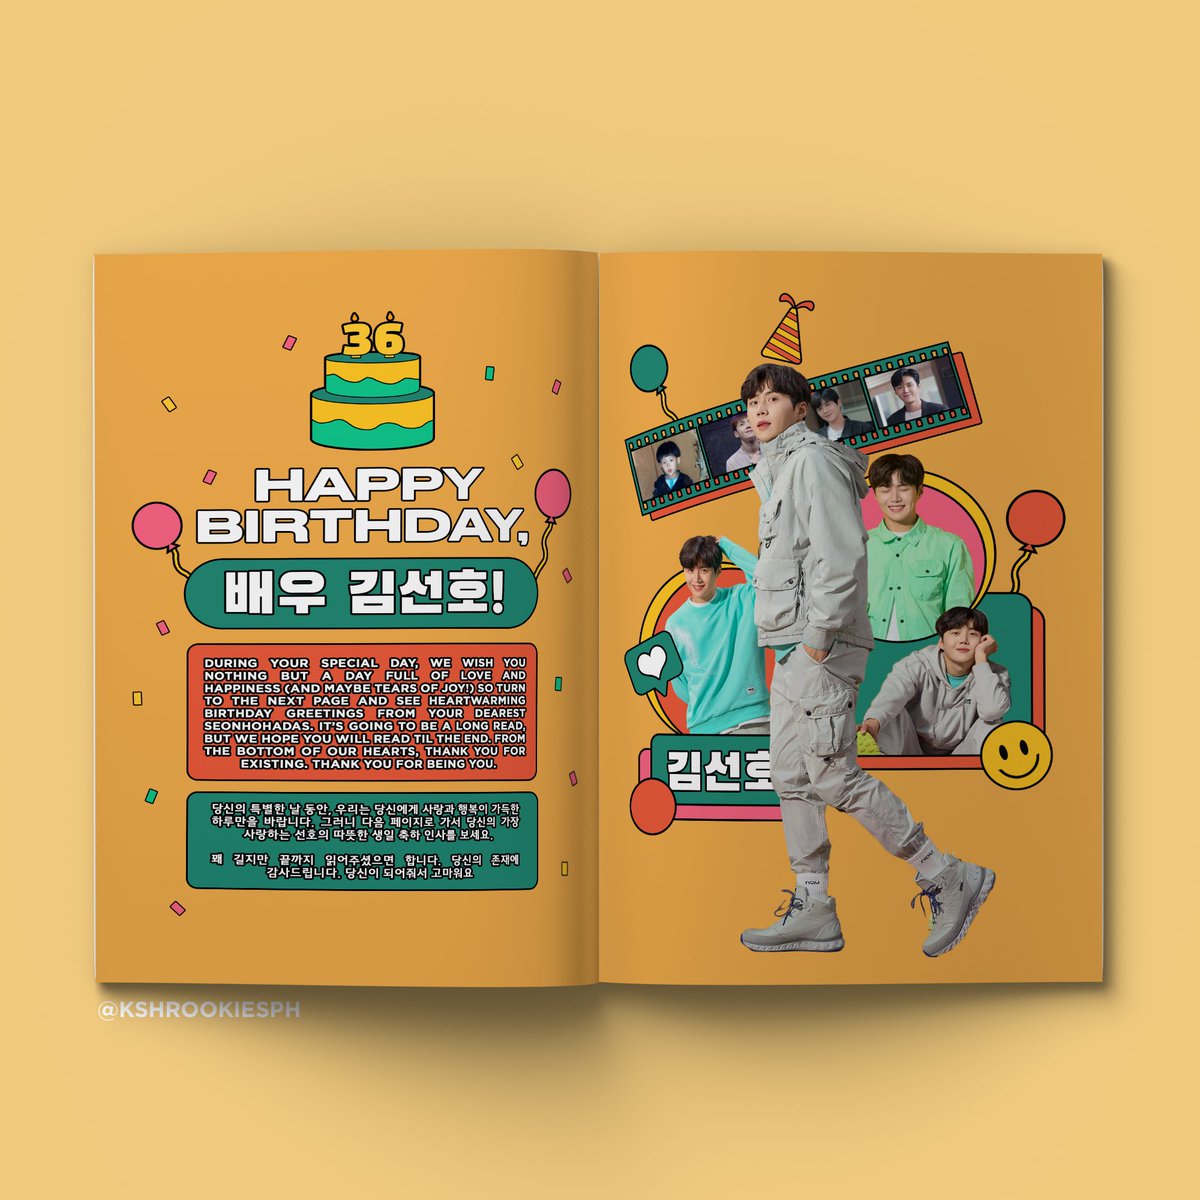 Meet Kim Seon Ho & Happy Birthday Kim Seon Ho spreads done!  We hope you are liking how the magazine is turning out so far! We are still accepting entries for fan letters, poems, or fan arts for a minimum donation of P20!  Form:  https://docs.google.com/forms/d/e/1FAIpQLSdLgsUABg6OaNtFCB4ptdS4RegSKhvMfDqXSIKzqSPtjU2guw/viewform #PreferMagUD